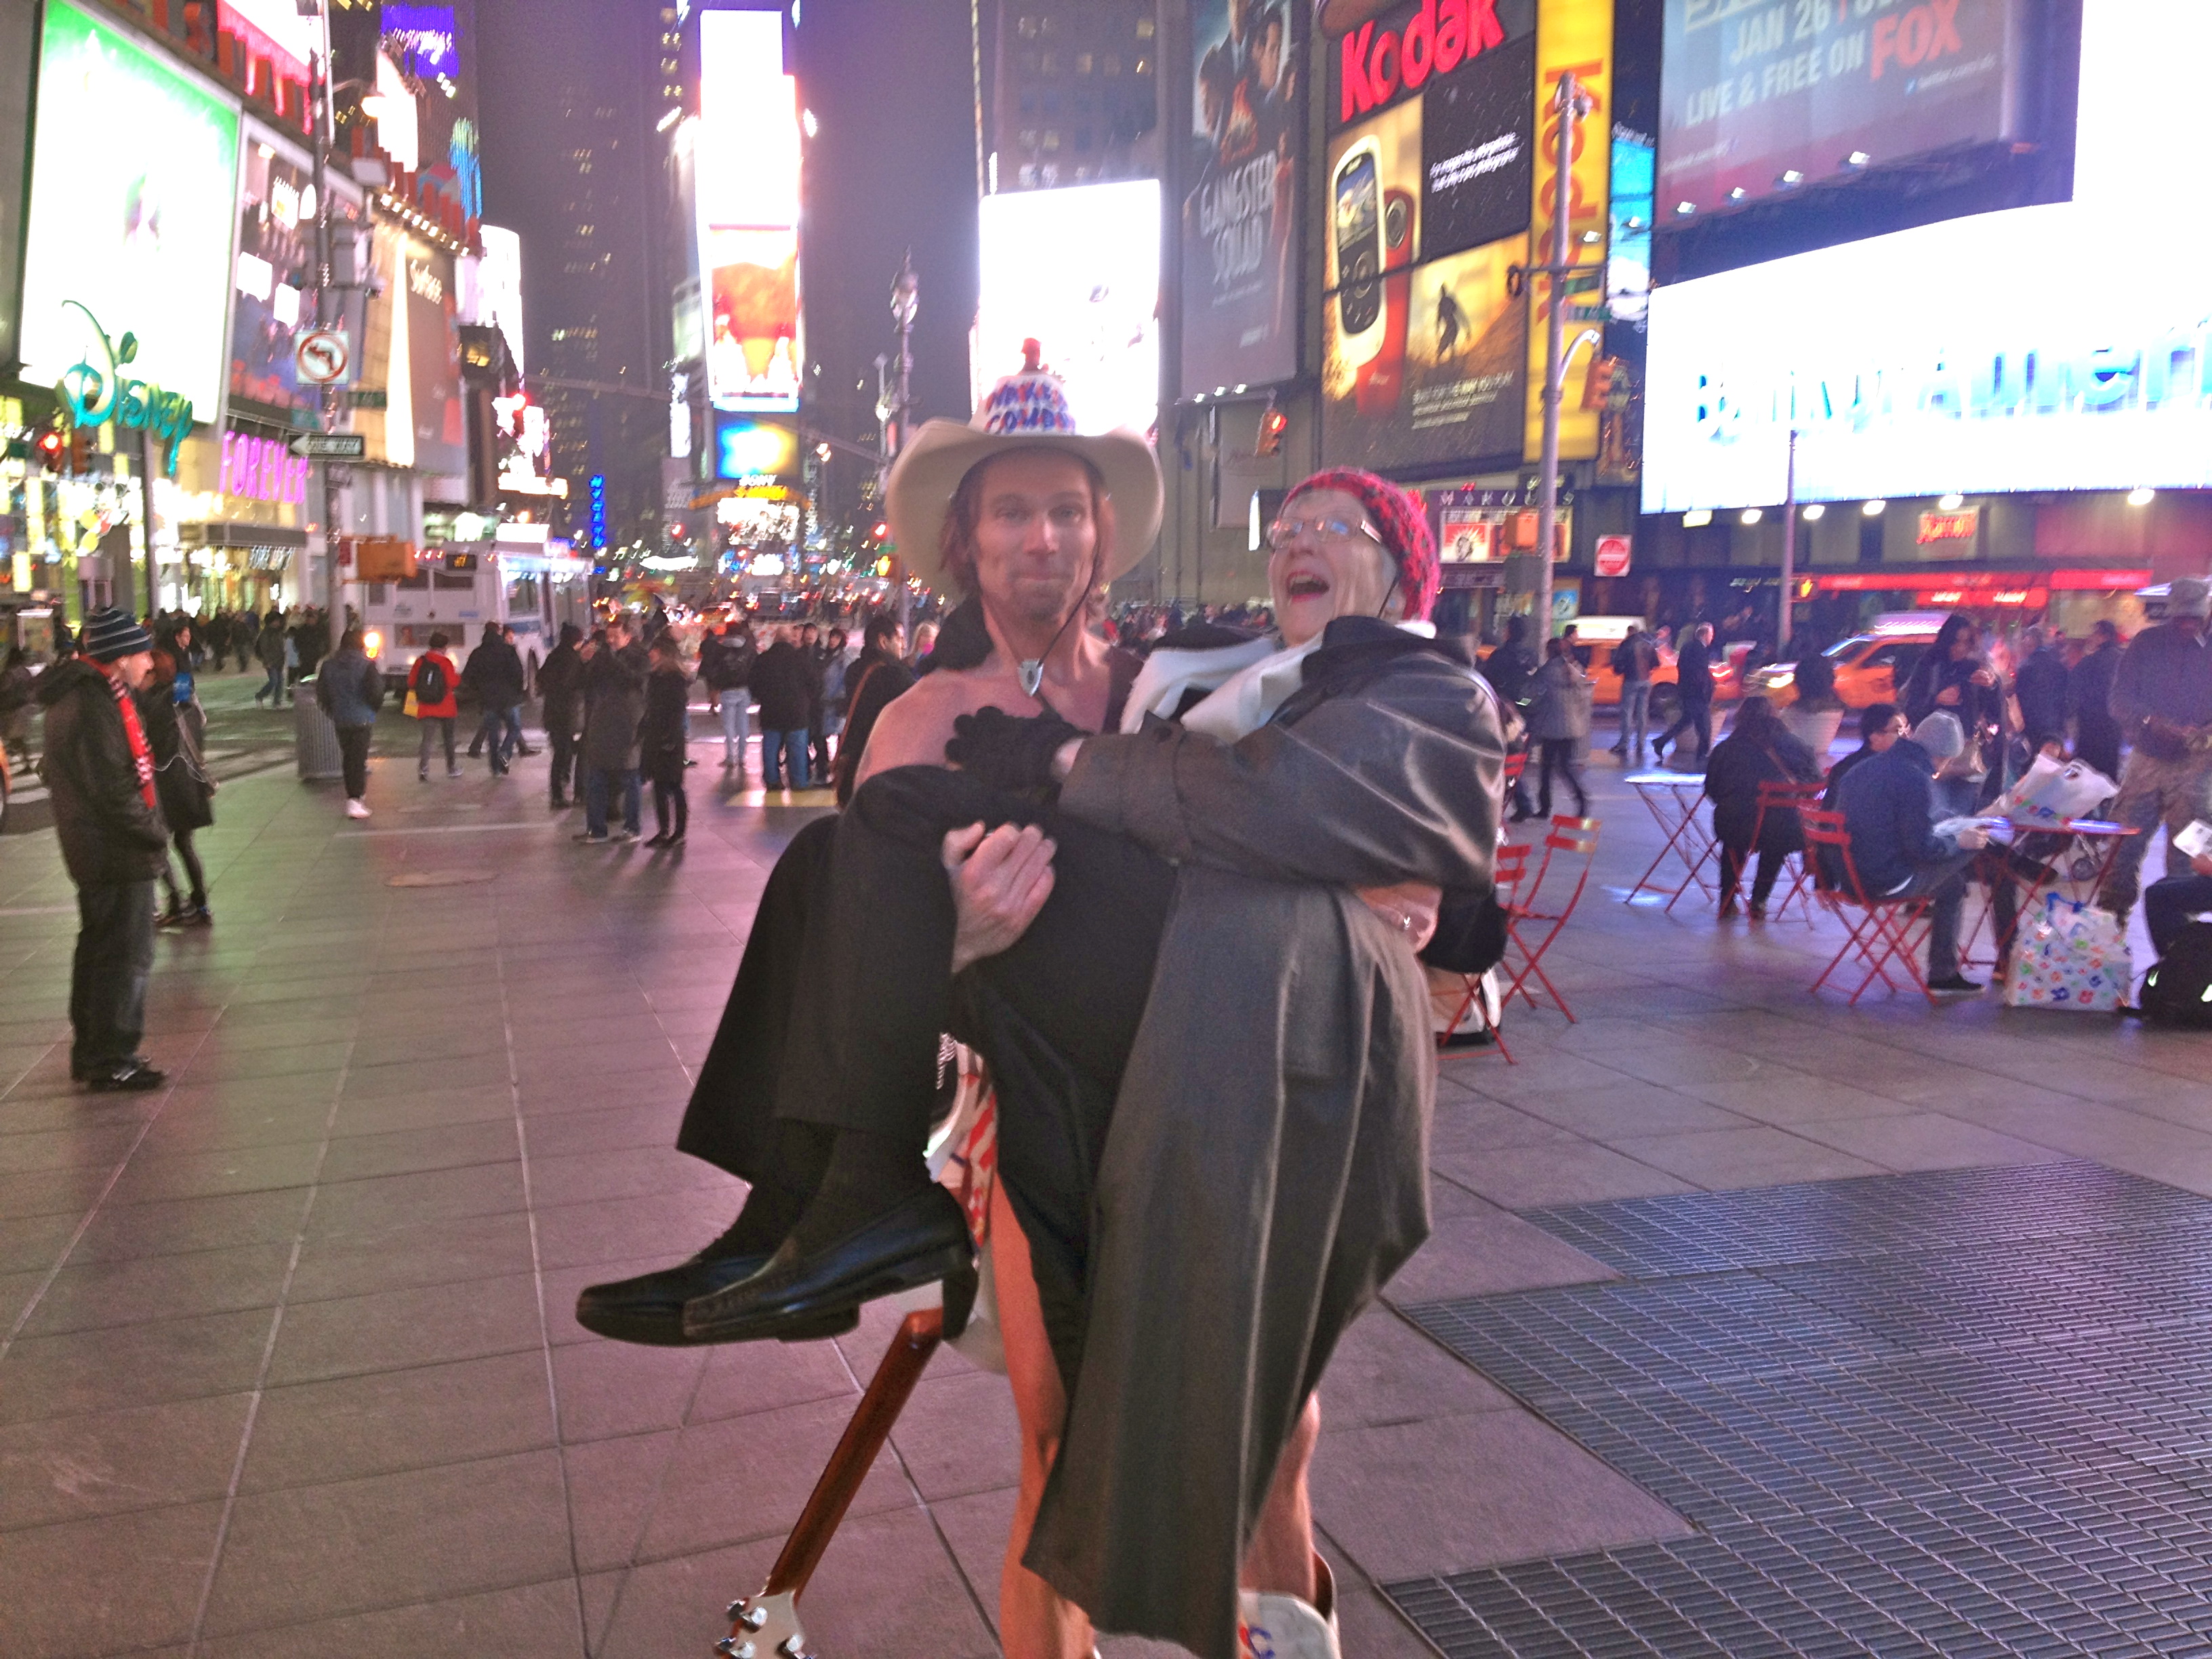 Louise the Great met The Naked Cowboy